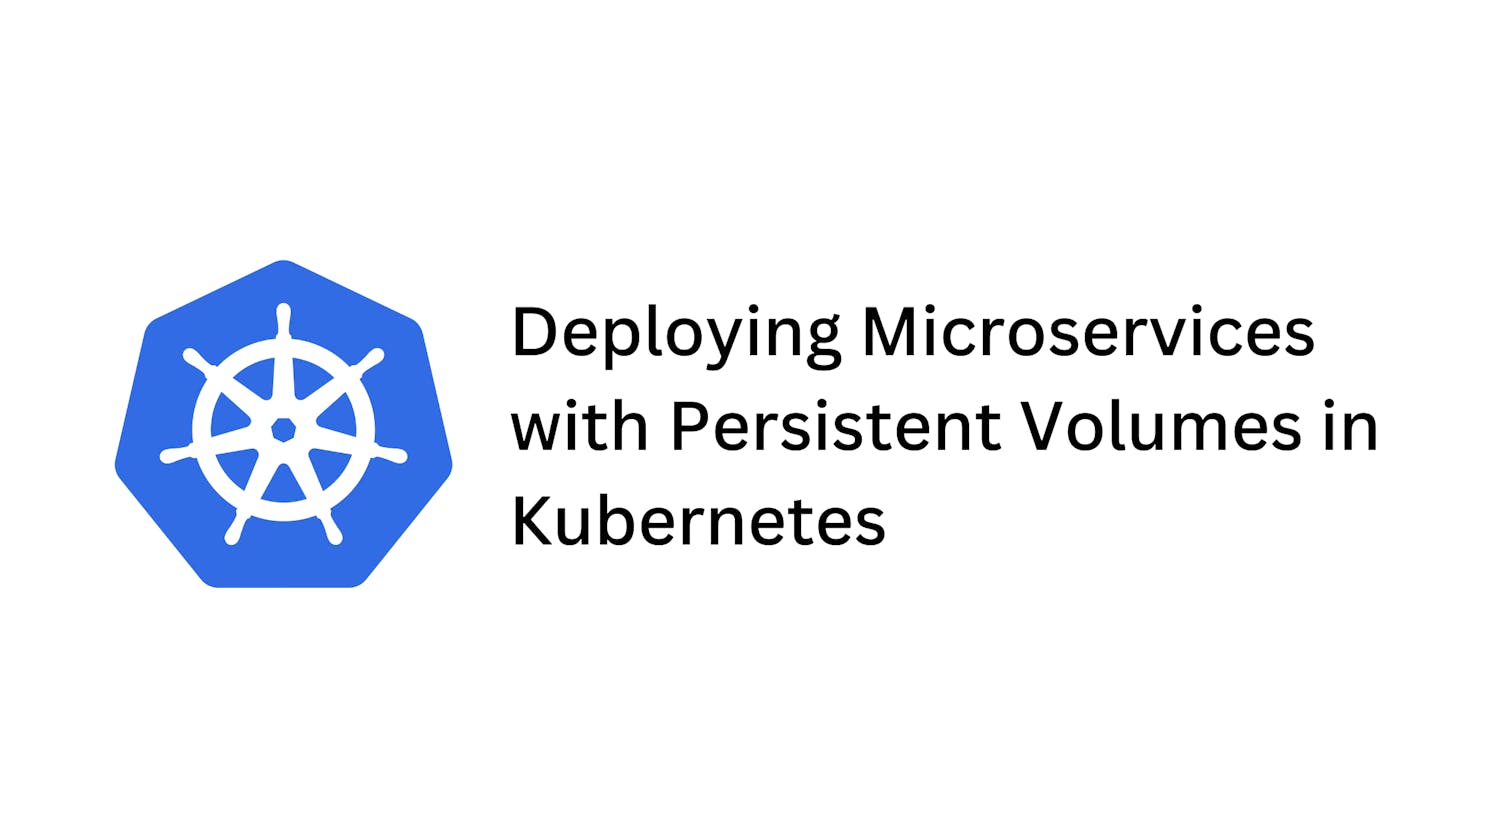 Deploying Microservices with Persistent Volumes in Kubernetes